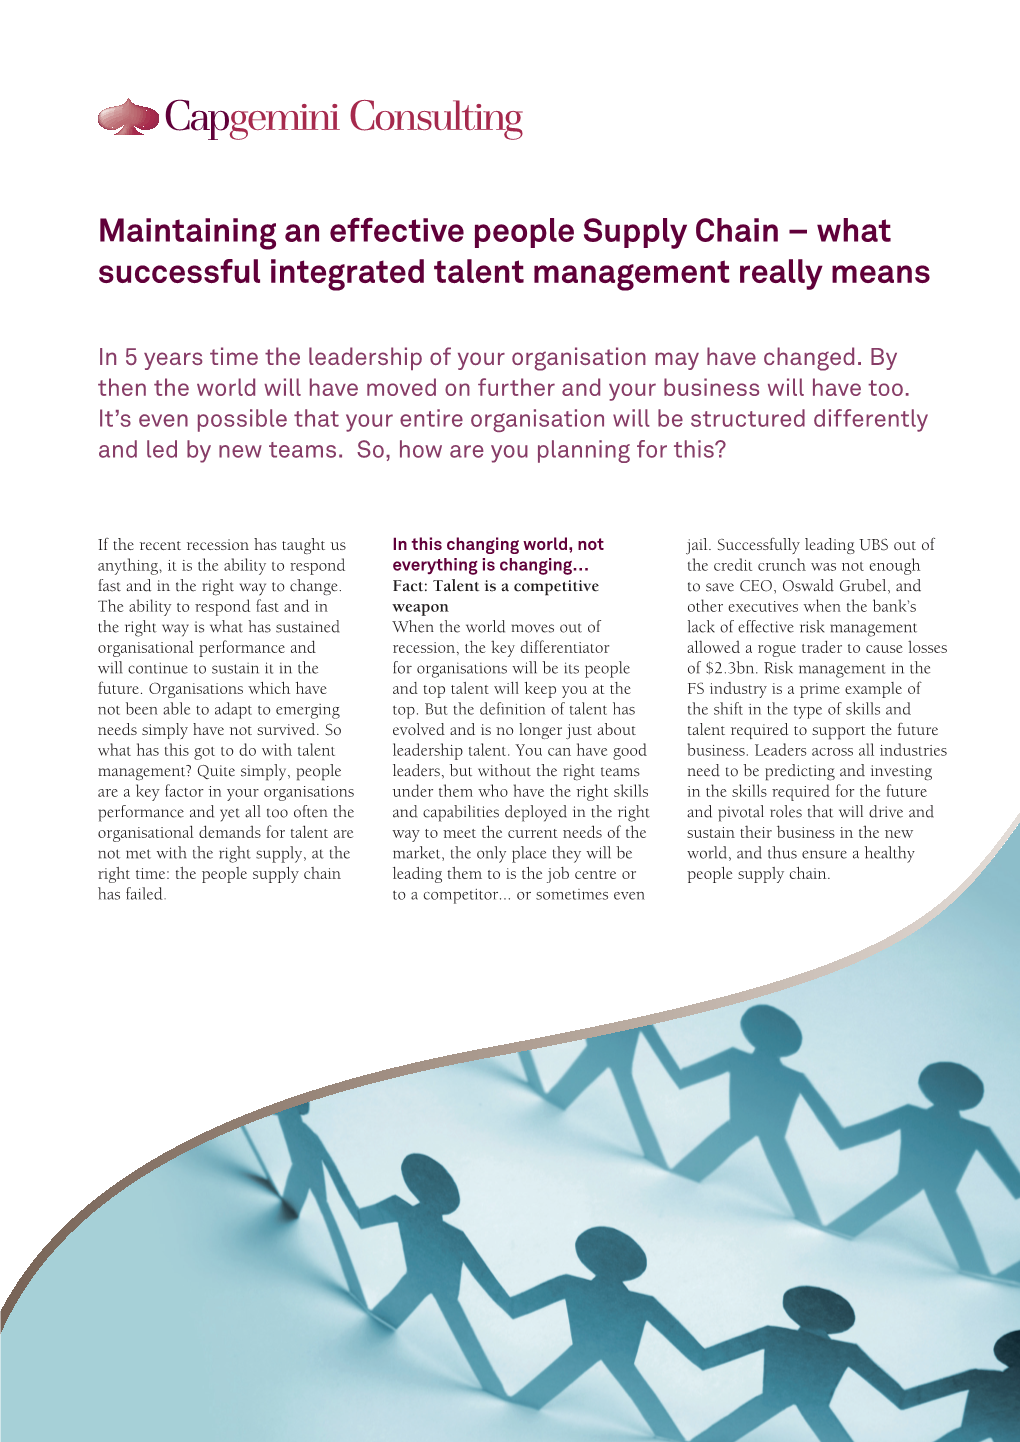 Maintaining an Effective People Supply Chain – What Successful Integrated Talent Management Really Means